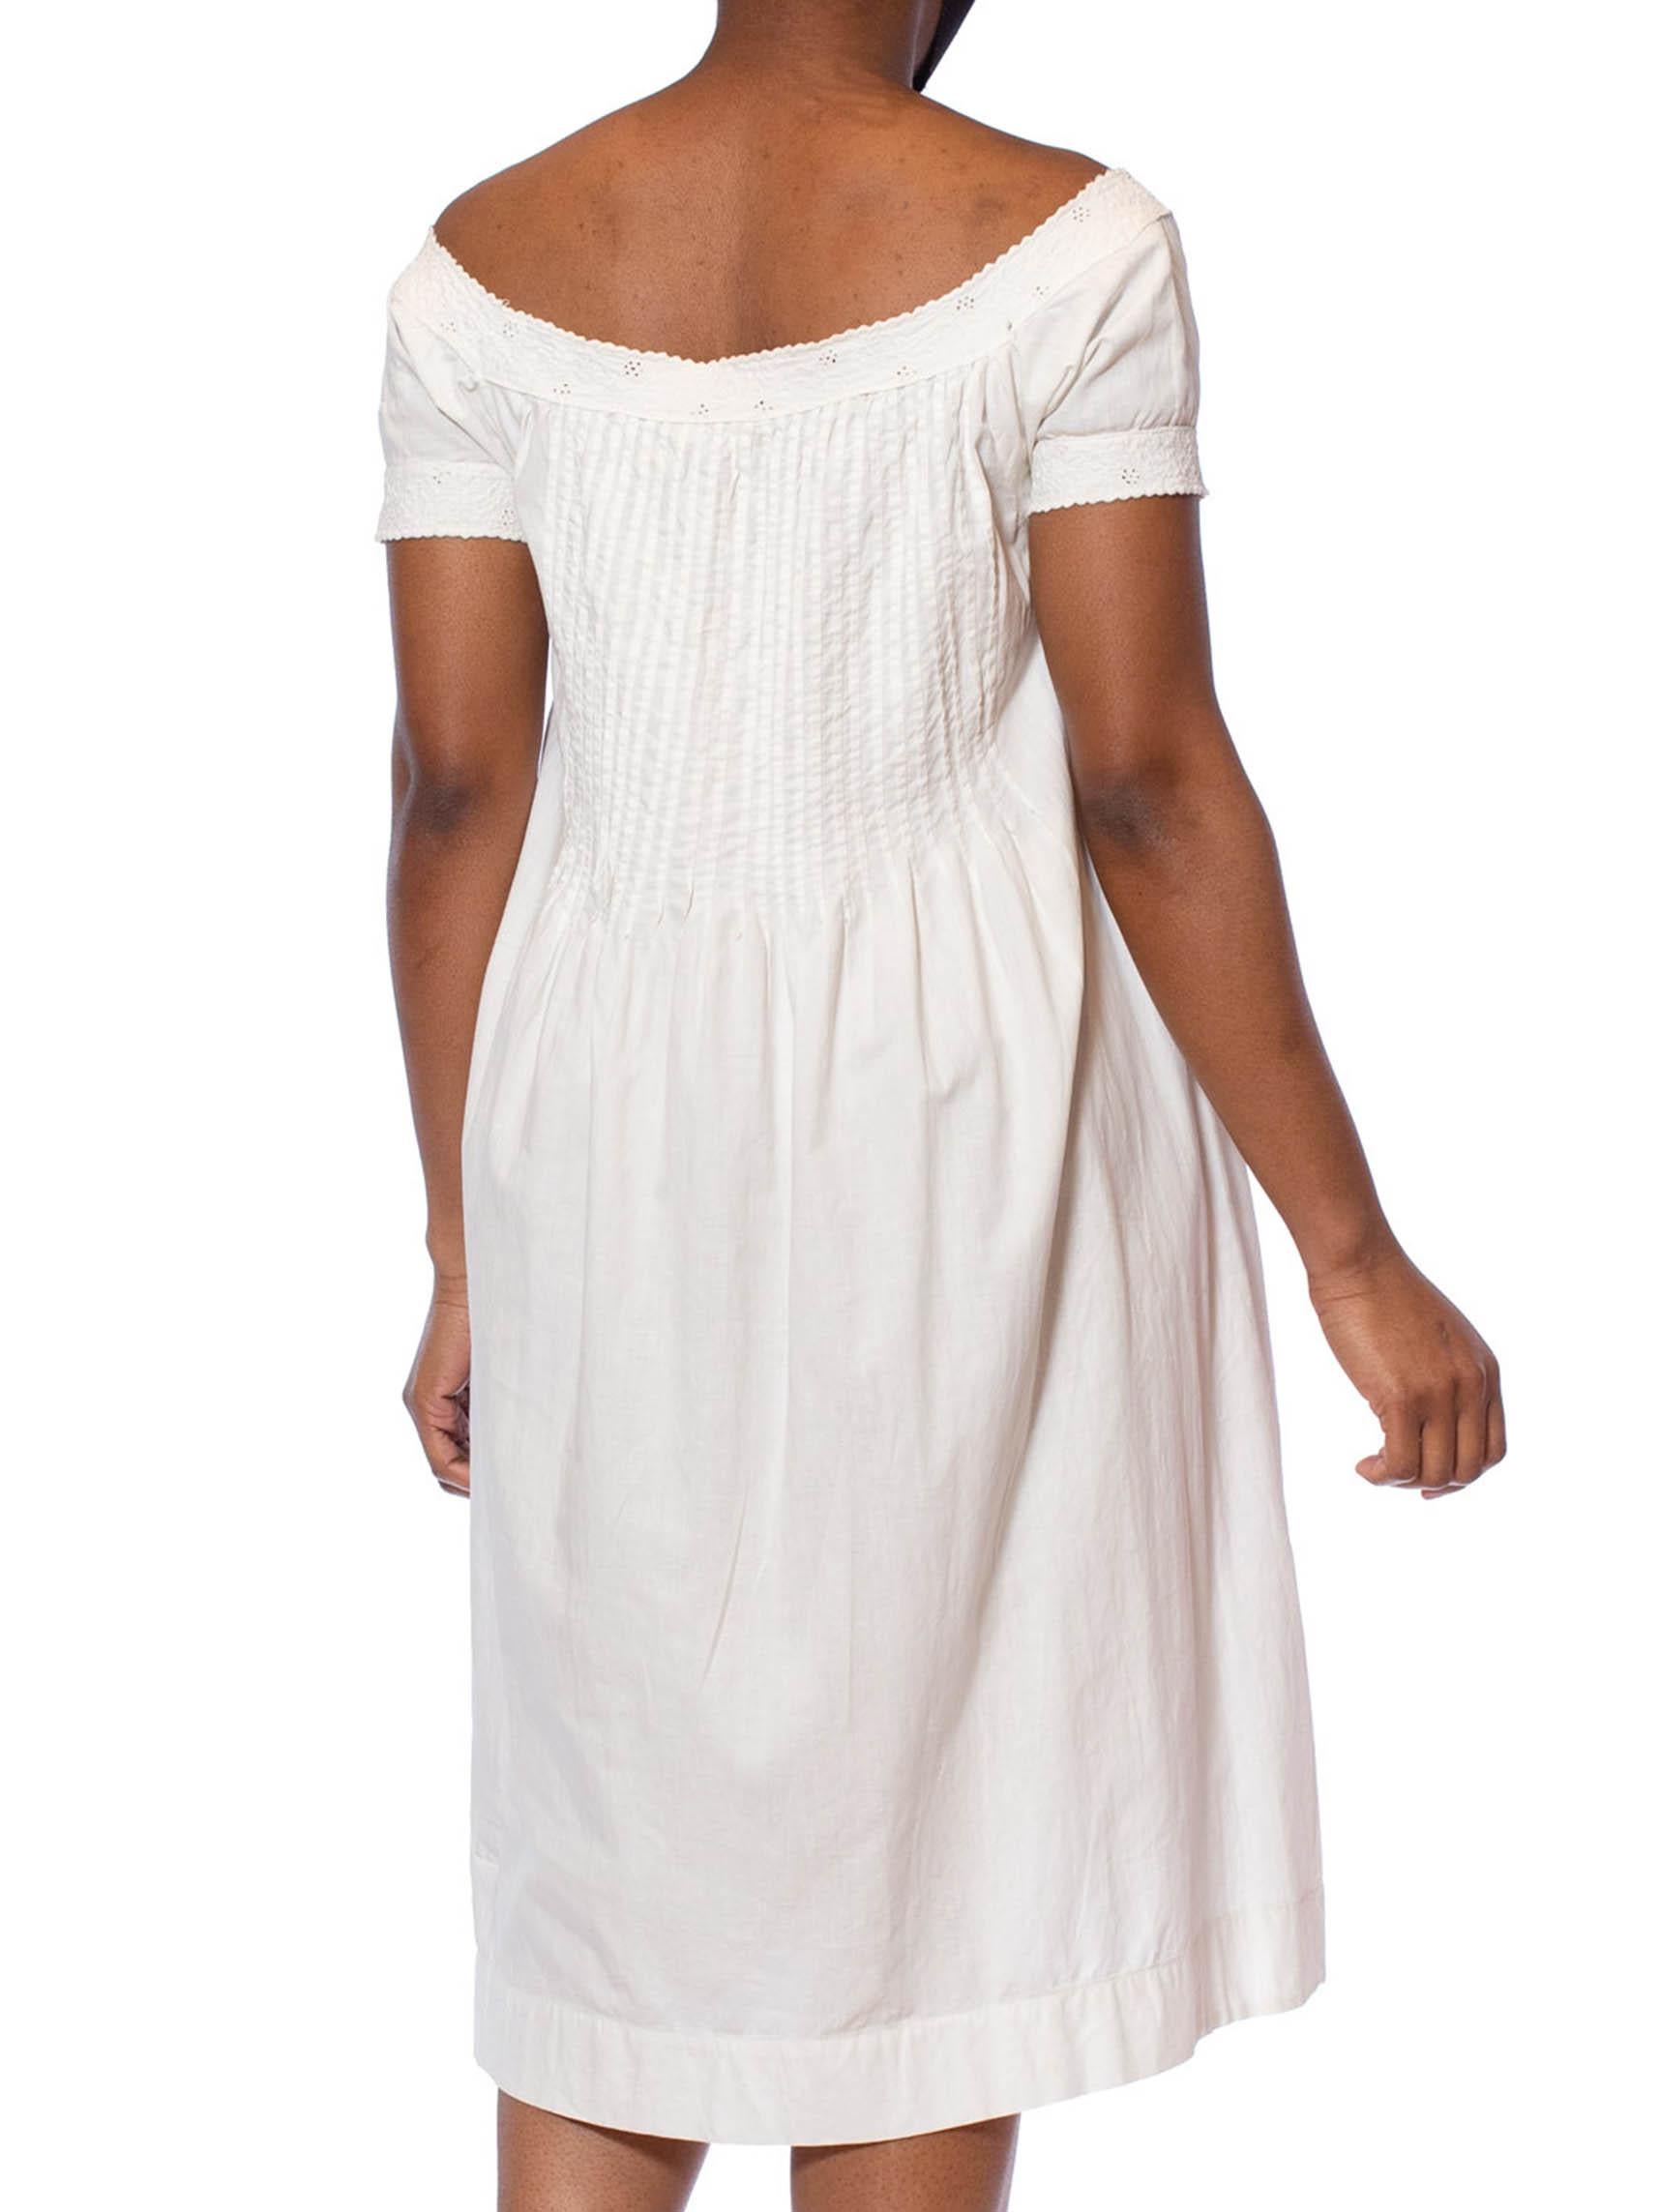 Victorian White Hand Embroidered Organic Cotton 1860S Chemise Dress 2